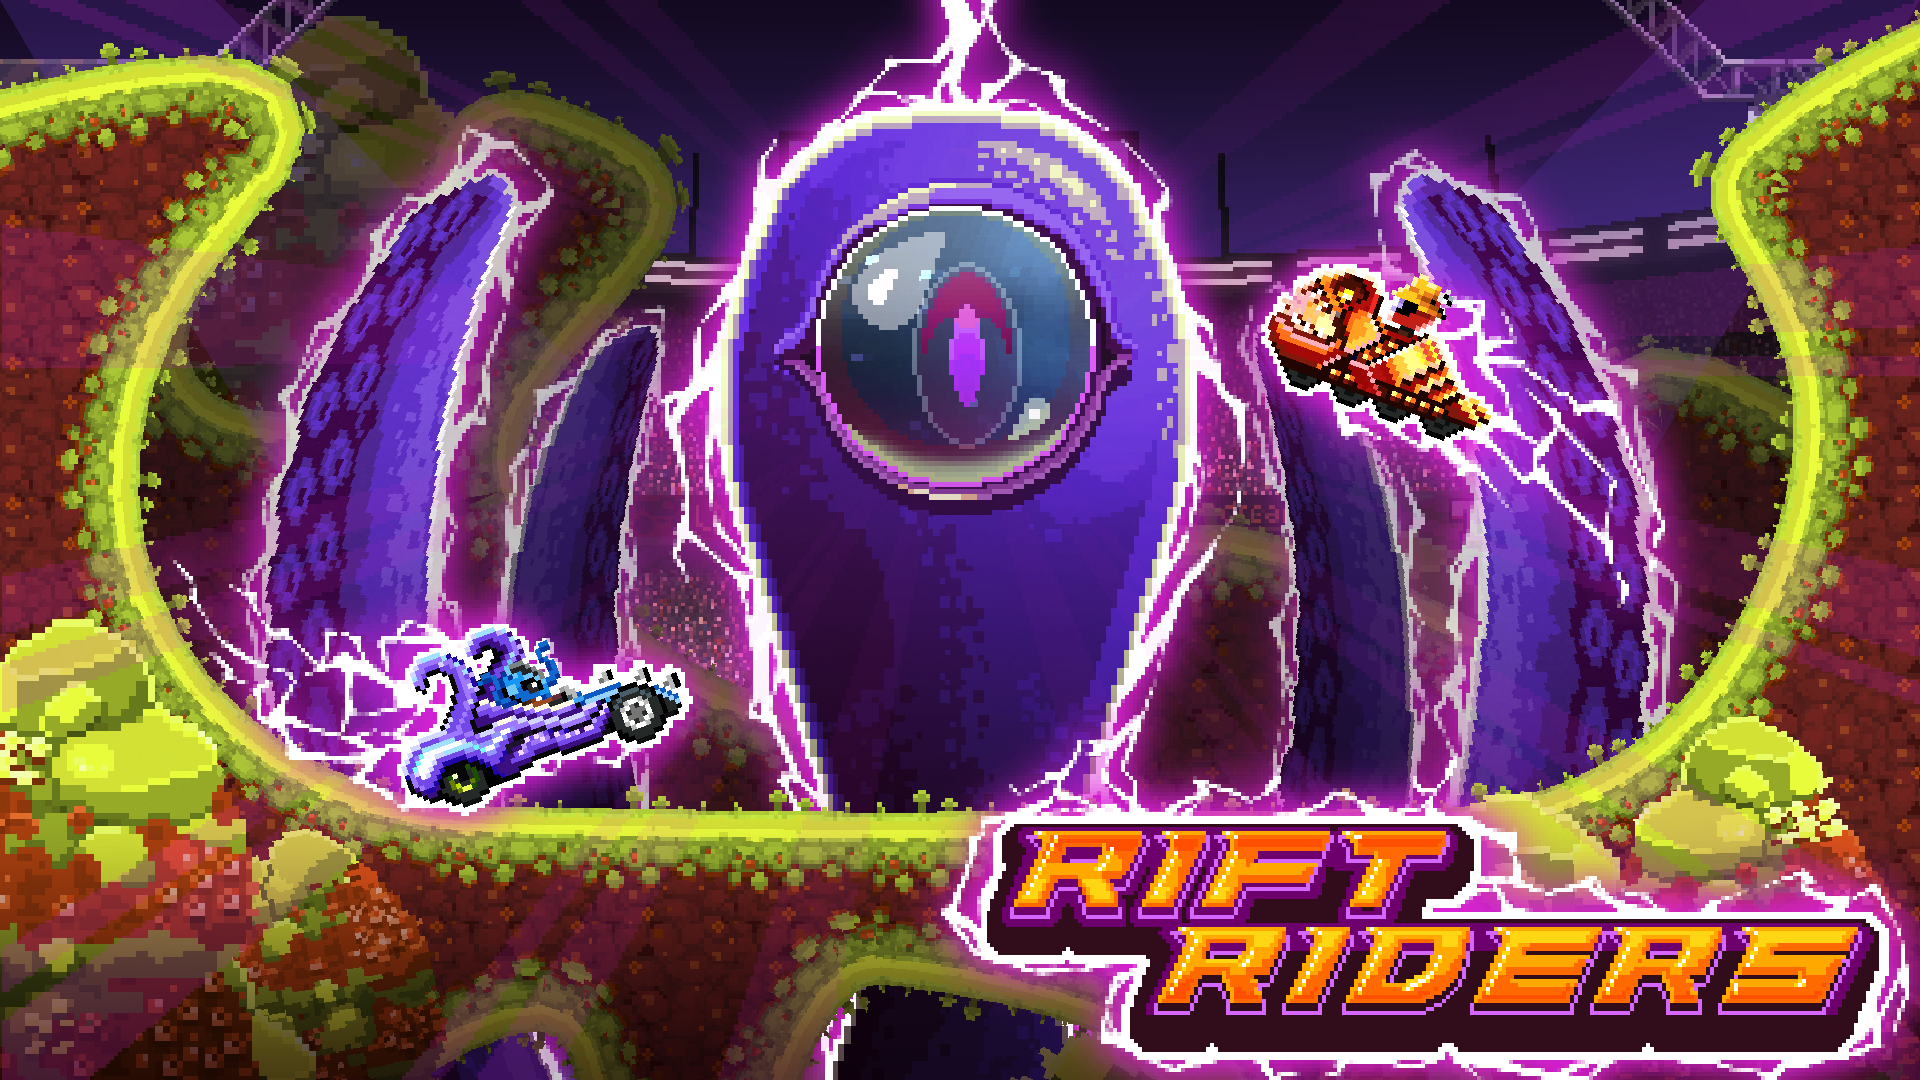 Free Download Drive Ahead Rift Riders Album On Imgur 1920x1080 For 